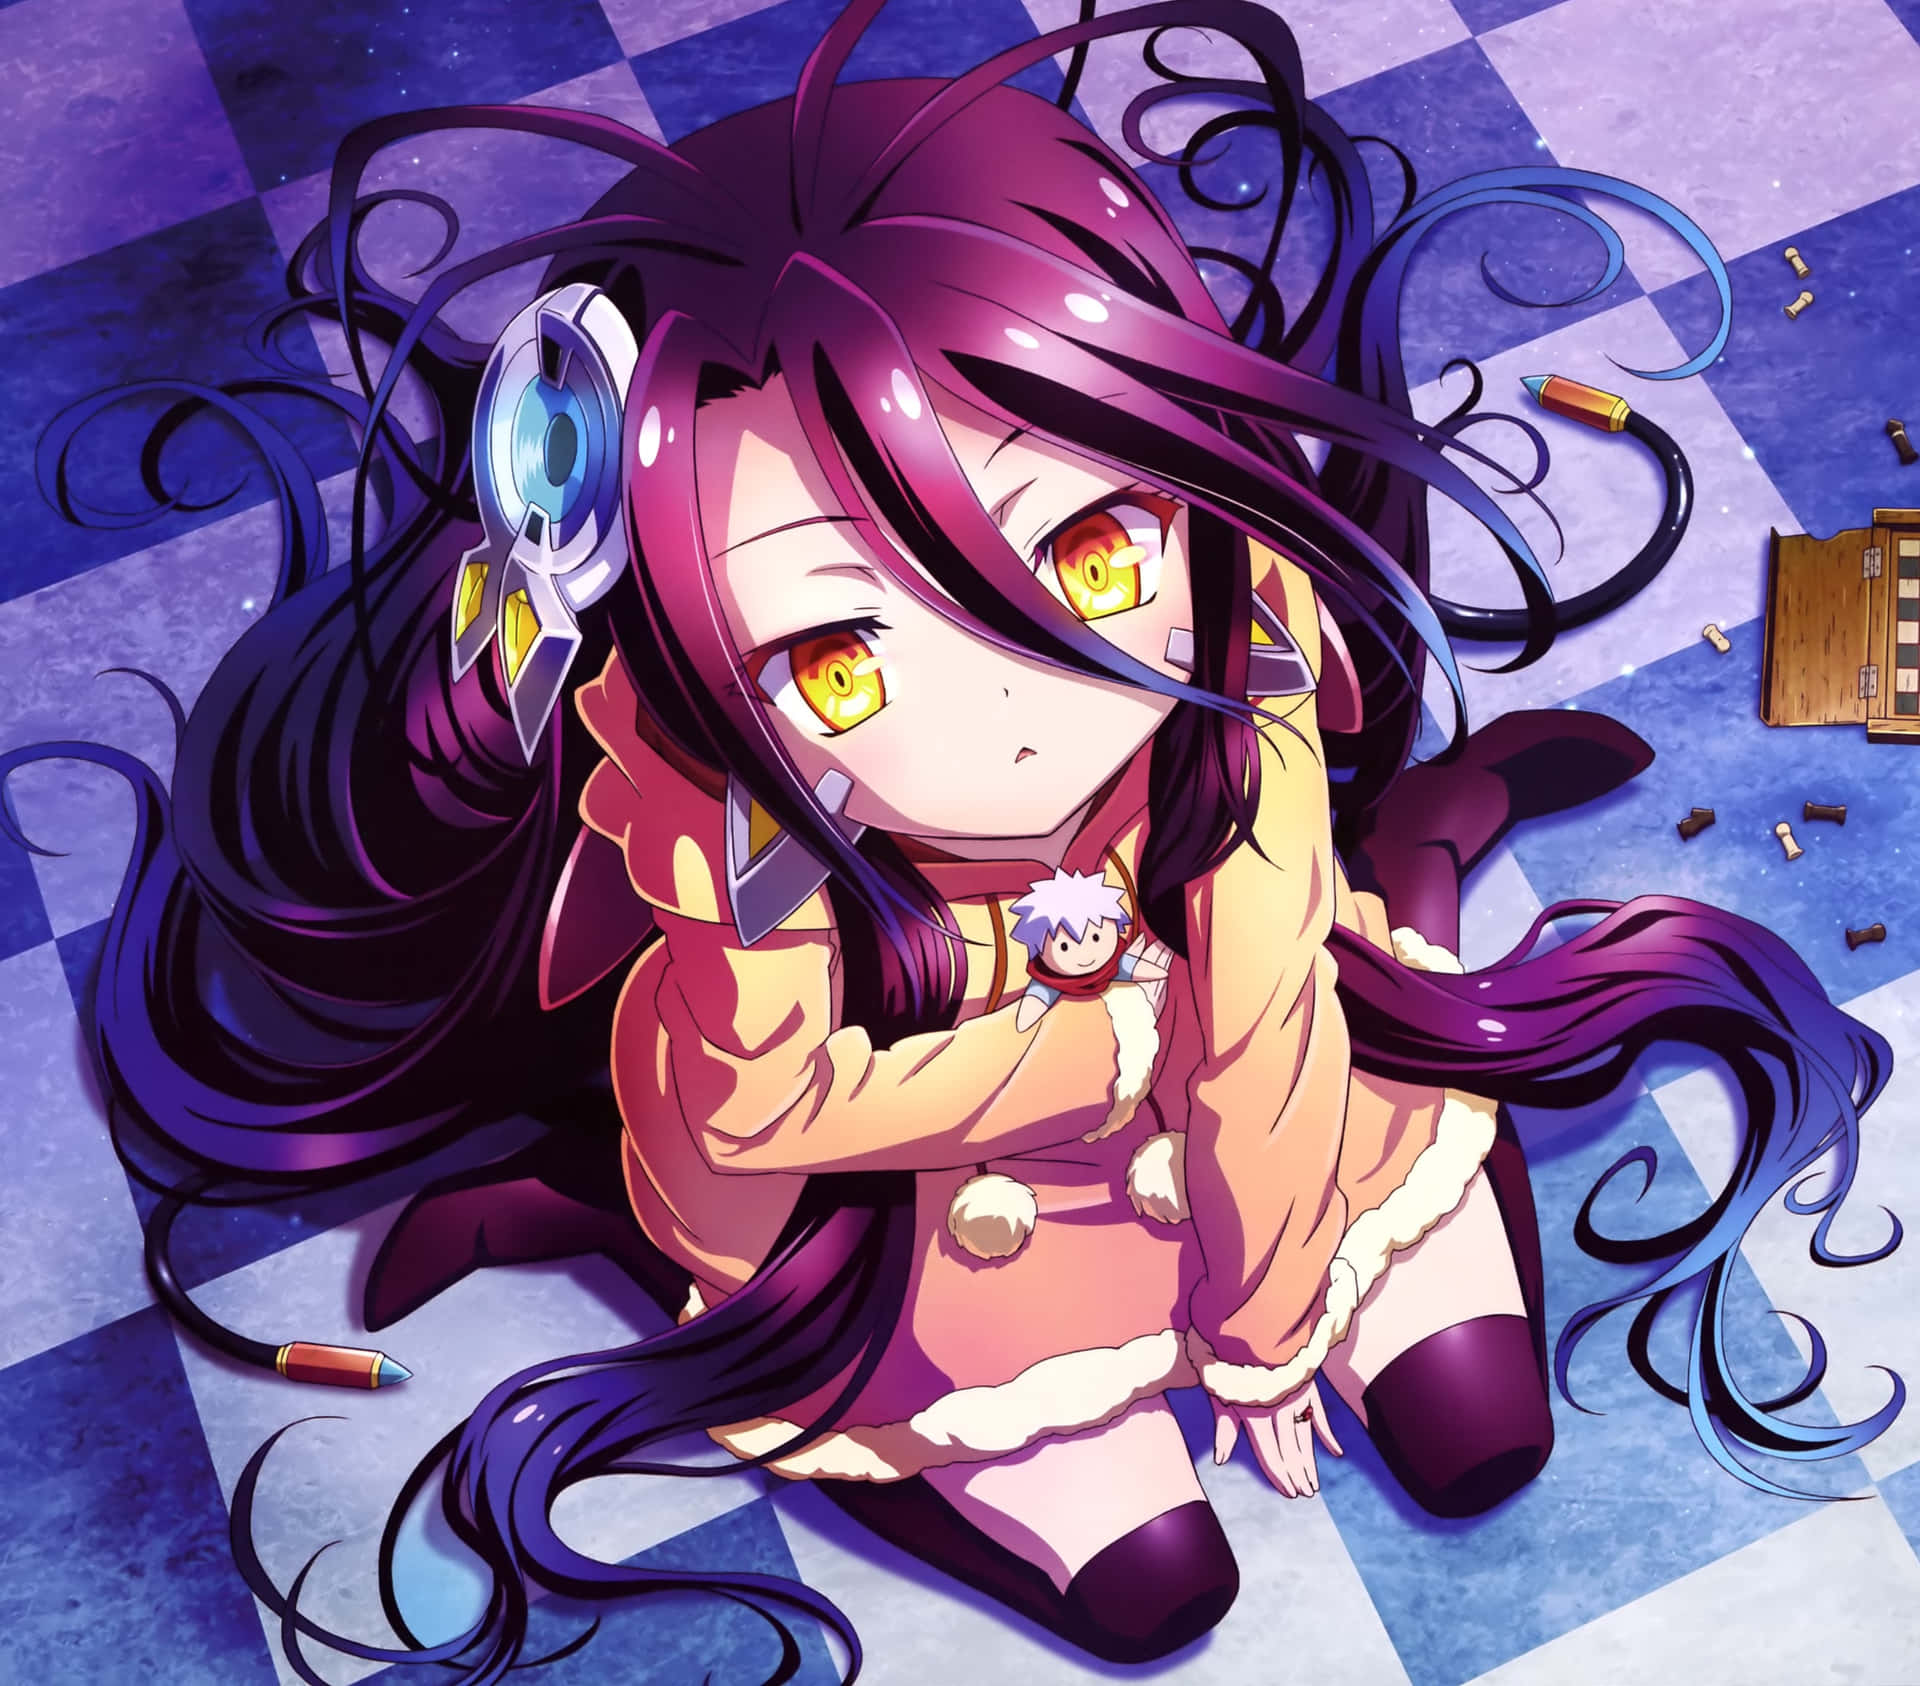 Step into an amazing world with No Game No Life